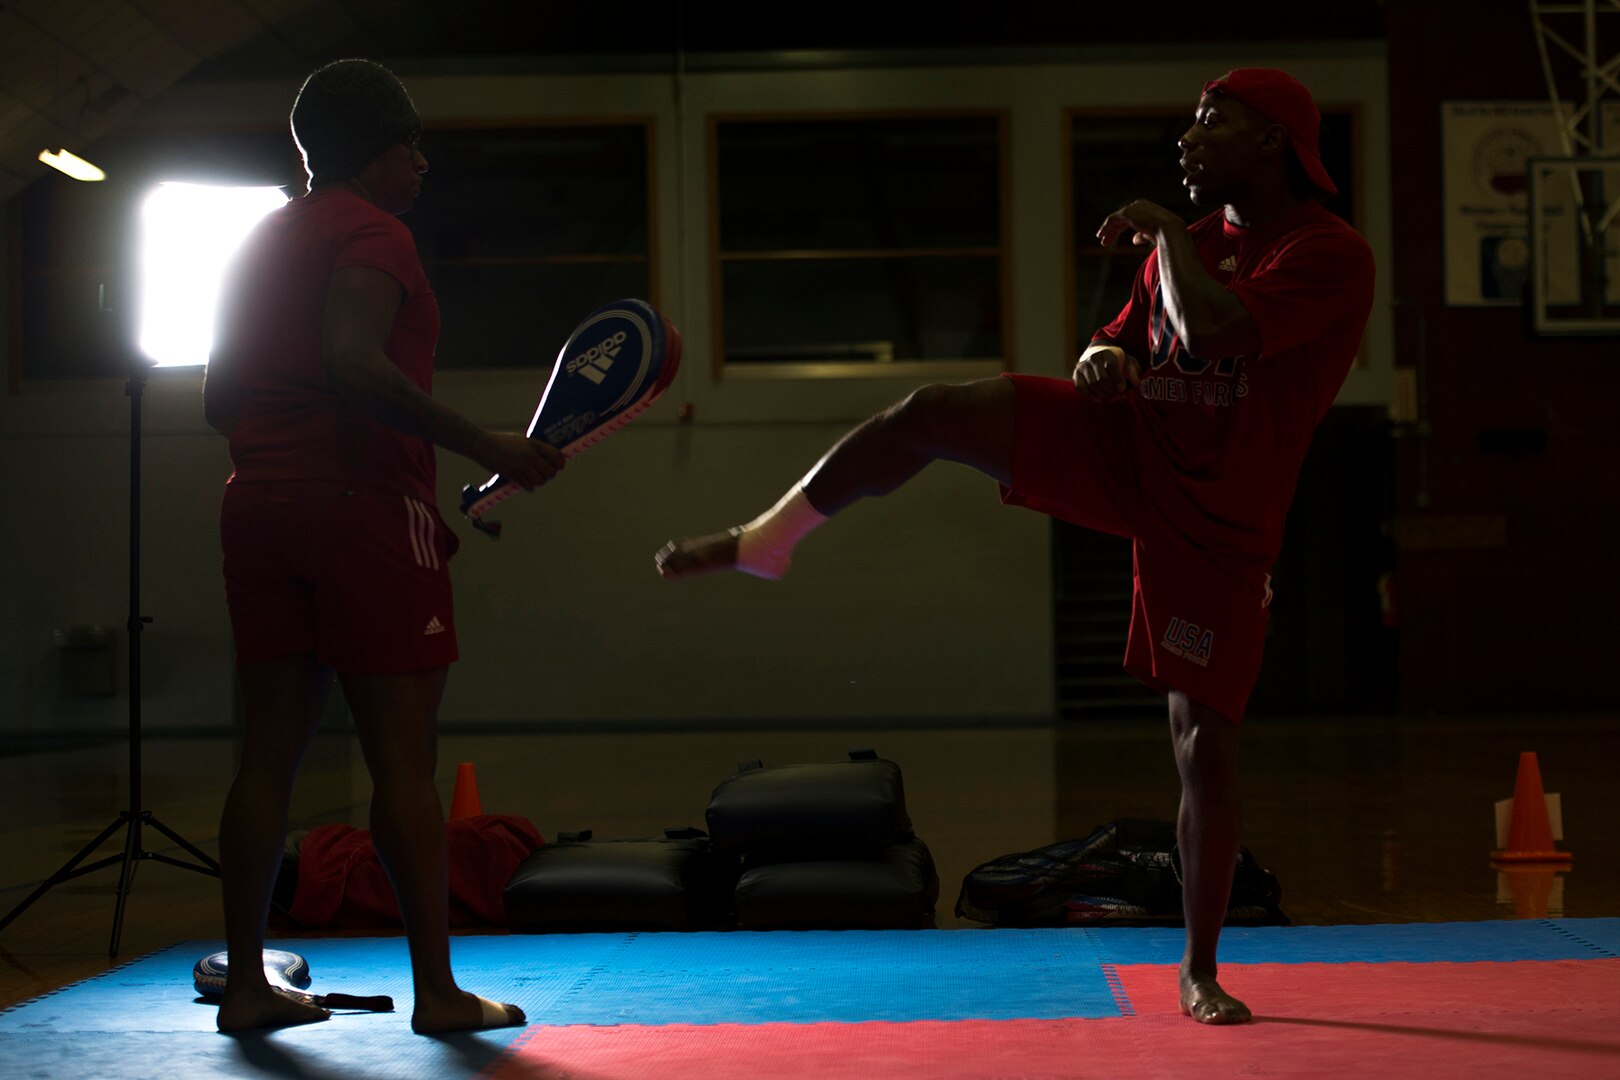 Army National Guard Sgt. Lamonte Kelly, right, kicks a target held by Army Staff Sgt. Ashley Sadlowski during U.S. Armed Forces Tae Kwon Do Team practice at Fort Indiantown Gap, Pa., Sept. 21, 2015. The team is training for the 2015 Military World Games in Mungyeong, South Korea, scheduled for Oct. 2 through Oct. 11. (DoD News photo by EJ Hersom)